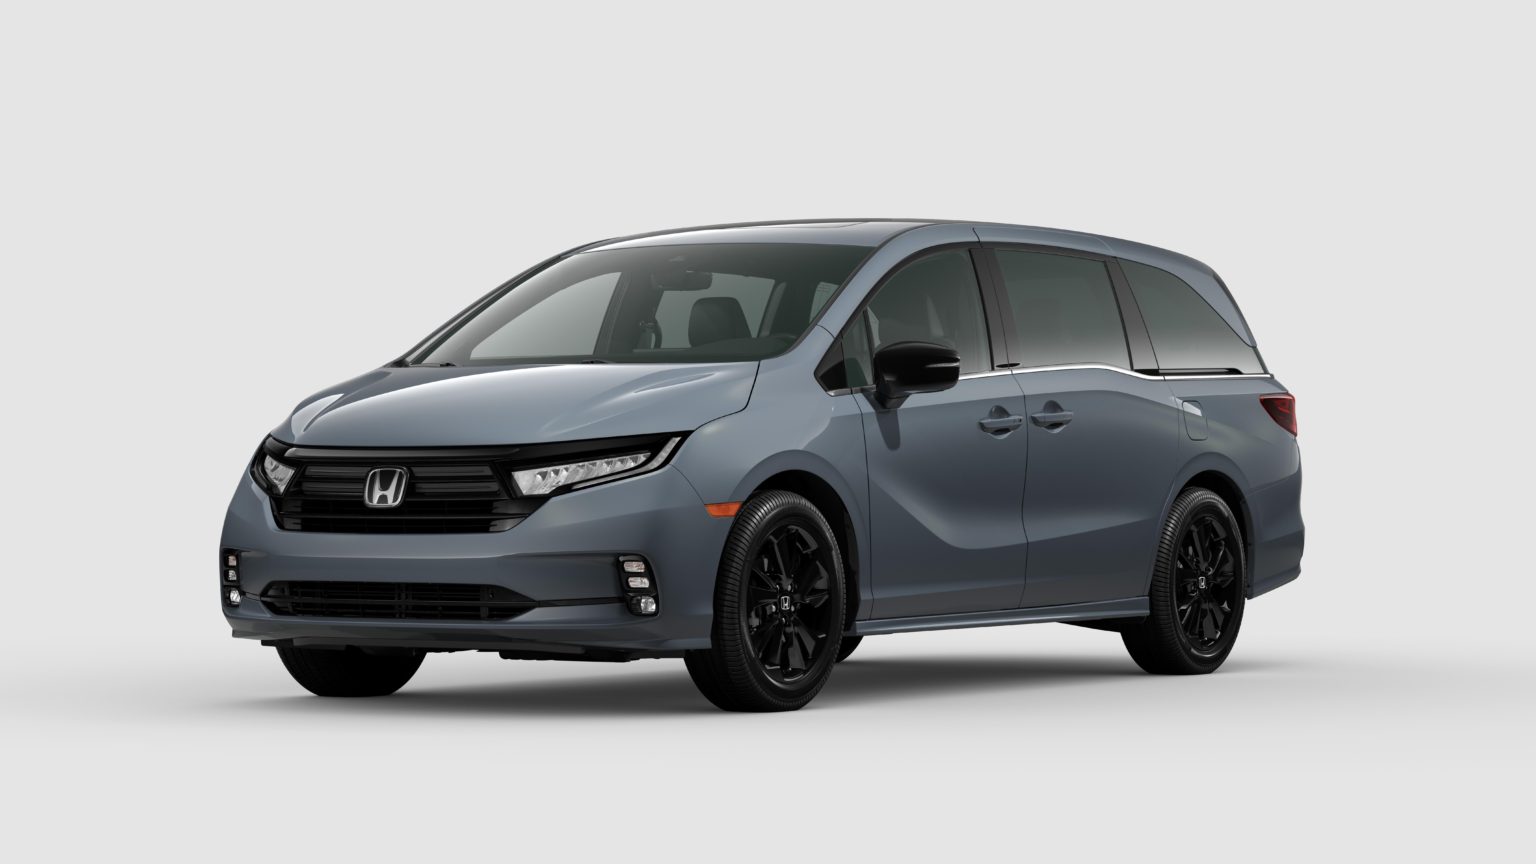 Sport is a new trim for the Odyssey minivan.